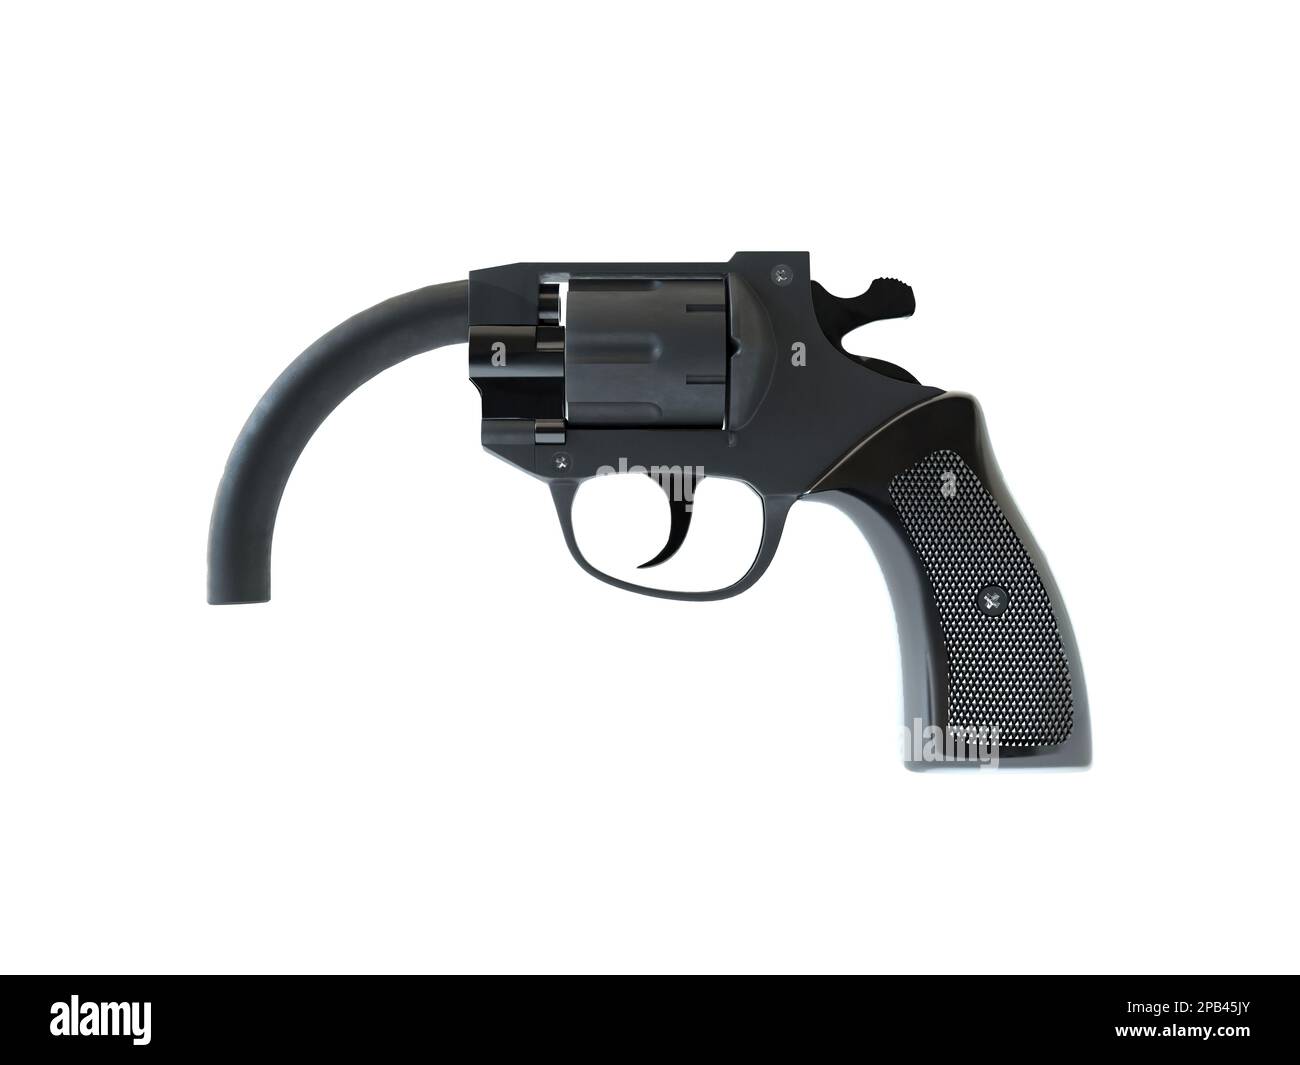 Broken Pistol impotence symbol of Masculinity and impotency. 3d render illustration. Black realistic Gun with barrel folded down. Isolated on white Stock Photo